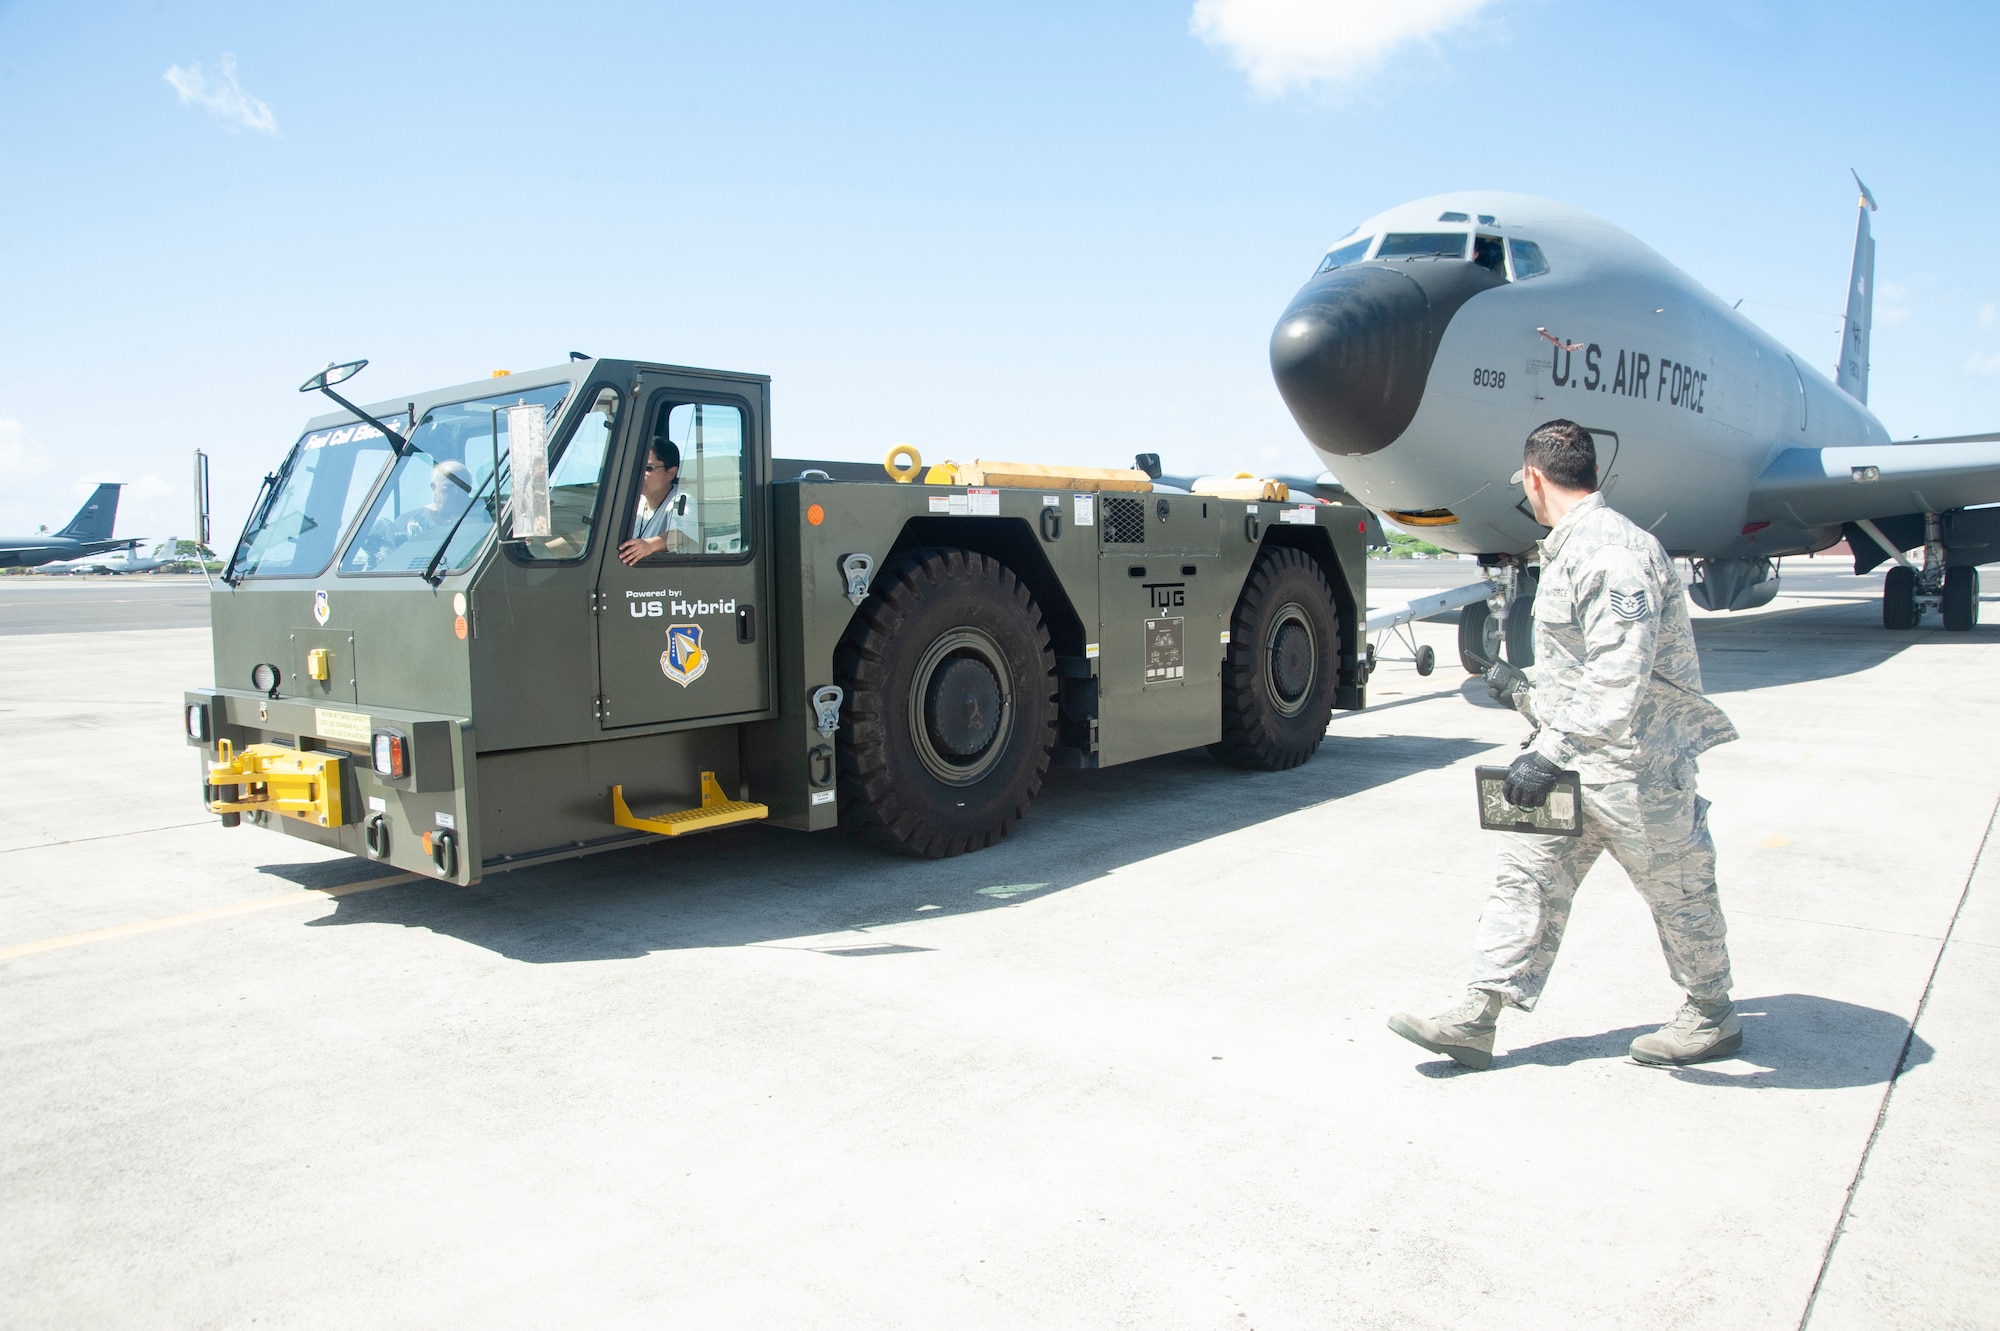 A 154th Maintenance Squadron crew chief does a final walk-around inspection before a U-30 Aircraft Tow Tractor powered by hydrogen fuel cell technology tows the aircraft, July 18, 2019, Joint Base Pearl Harbor-Hickam, Hawaii.